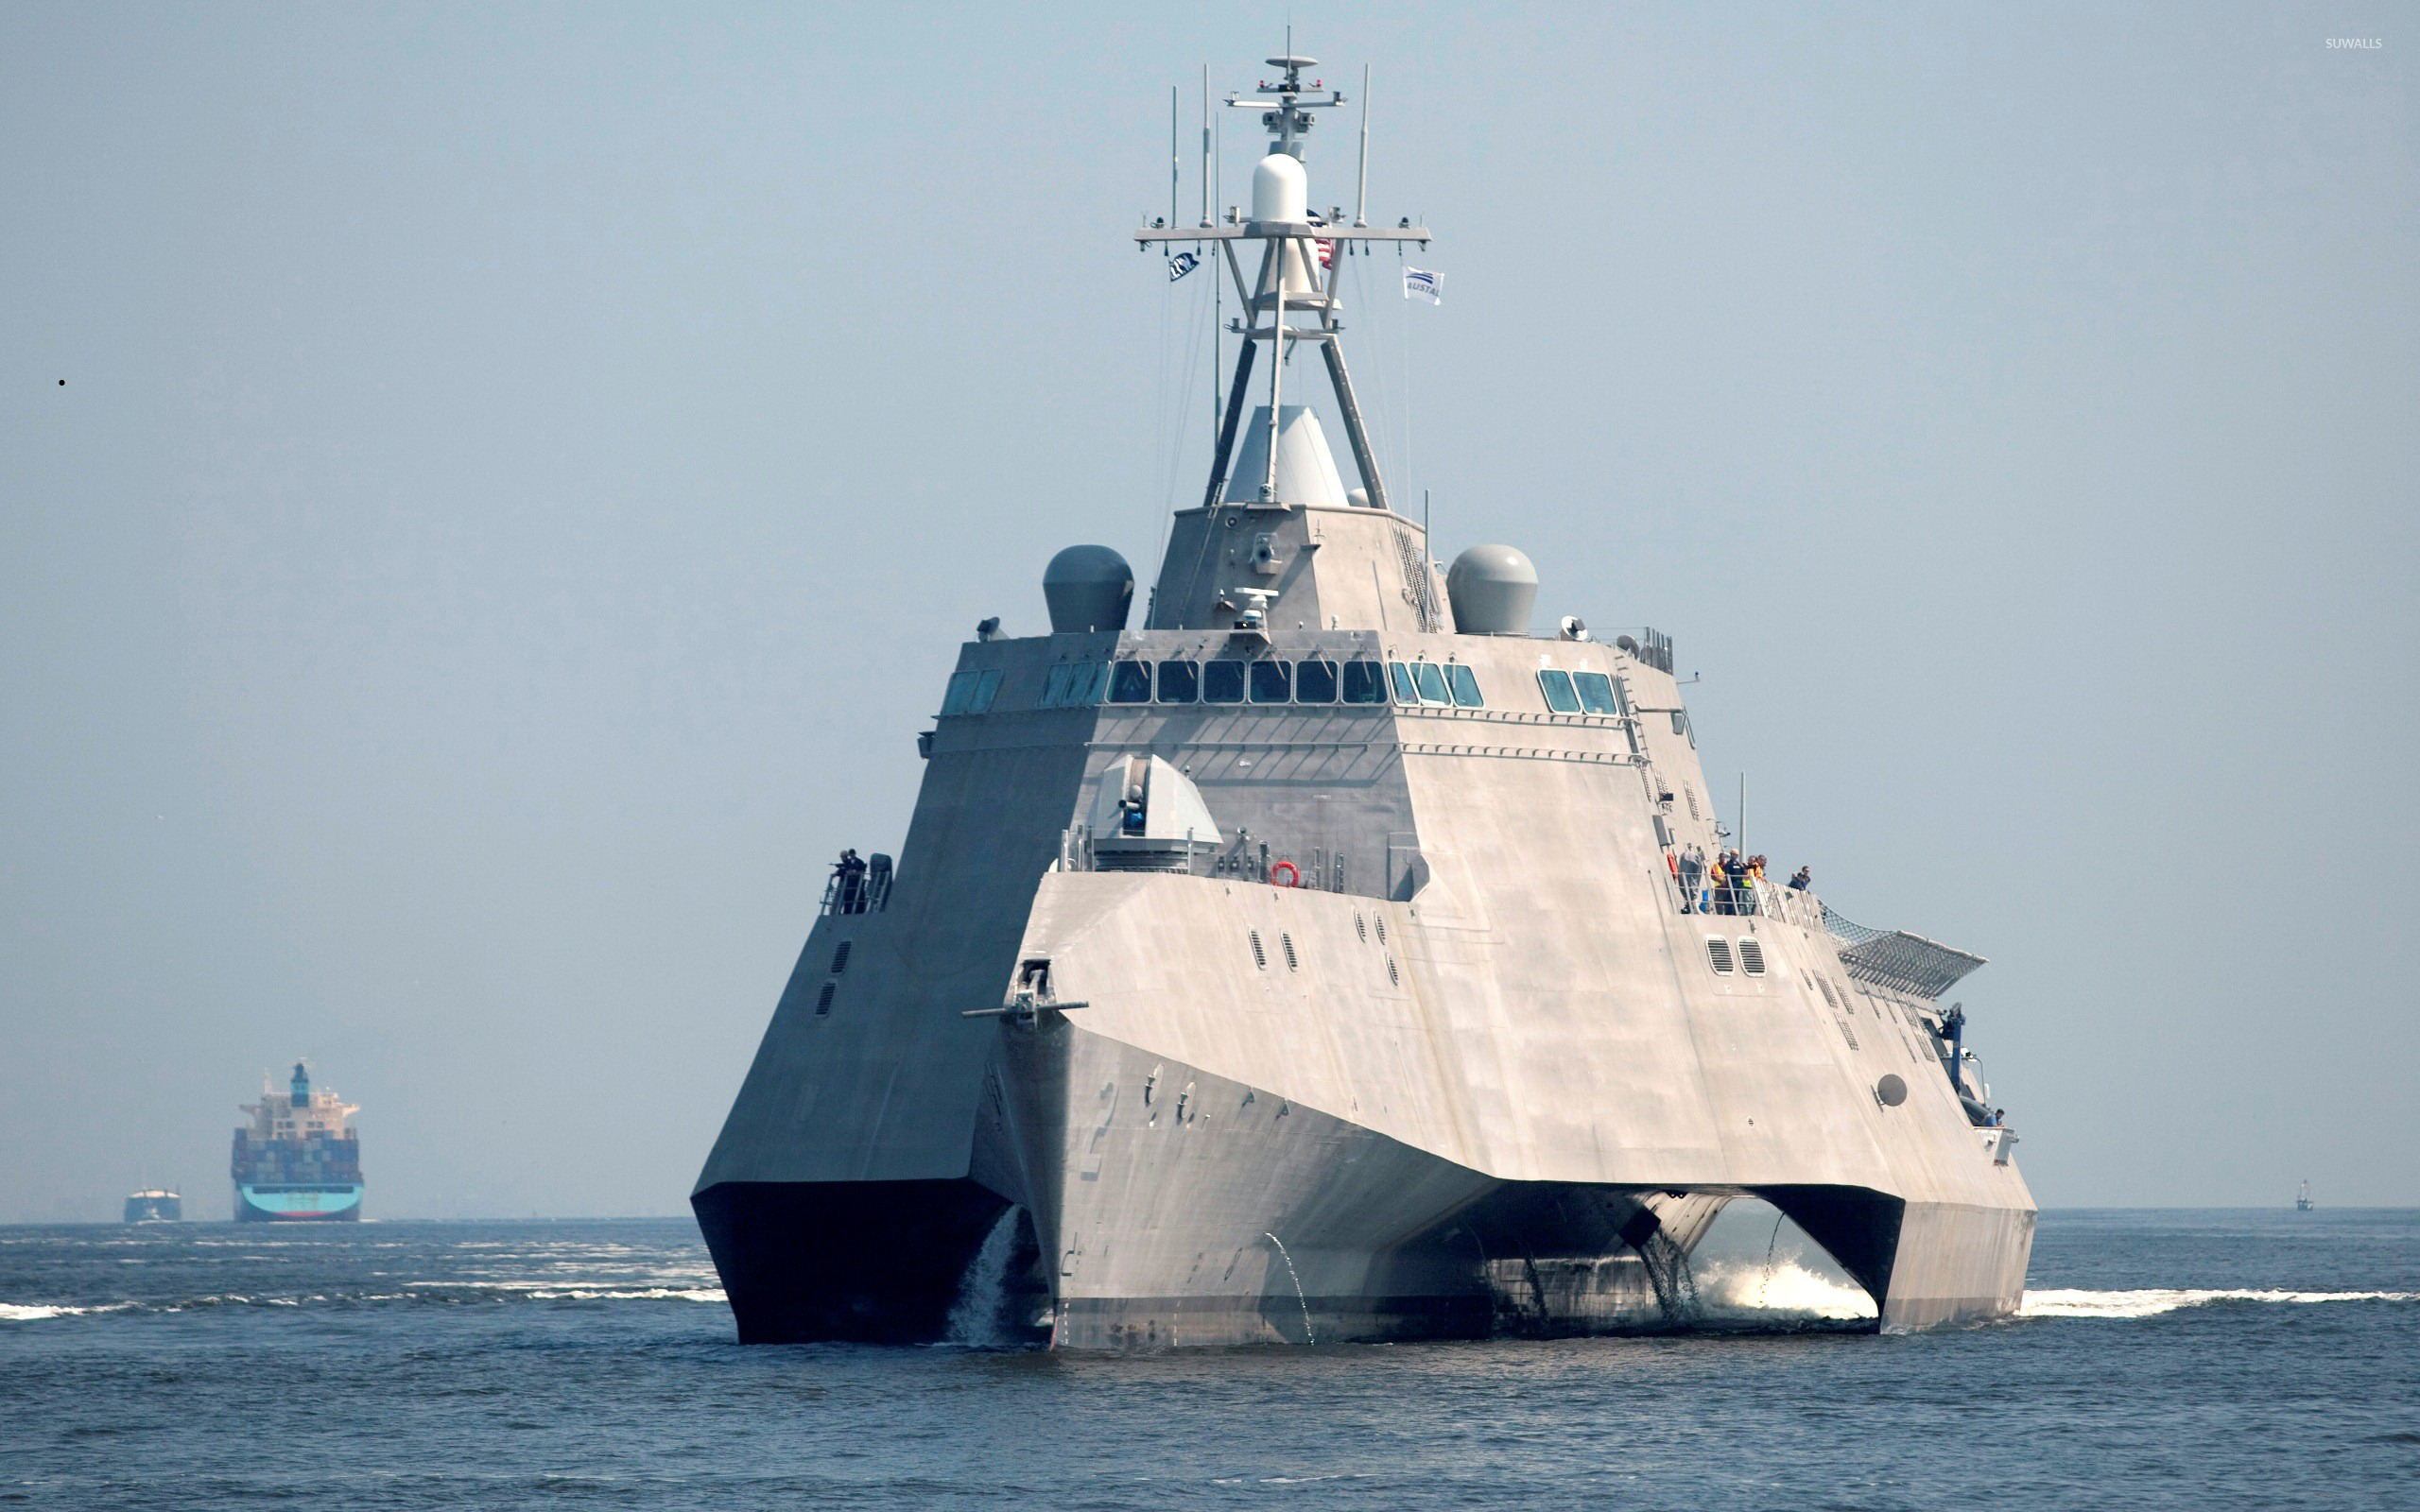 Uss Independence Lcs 2 - HD Wallpaper 